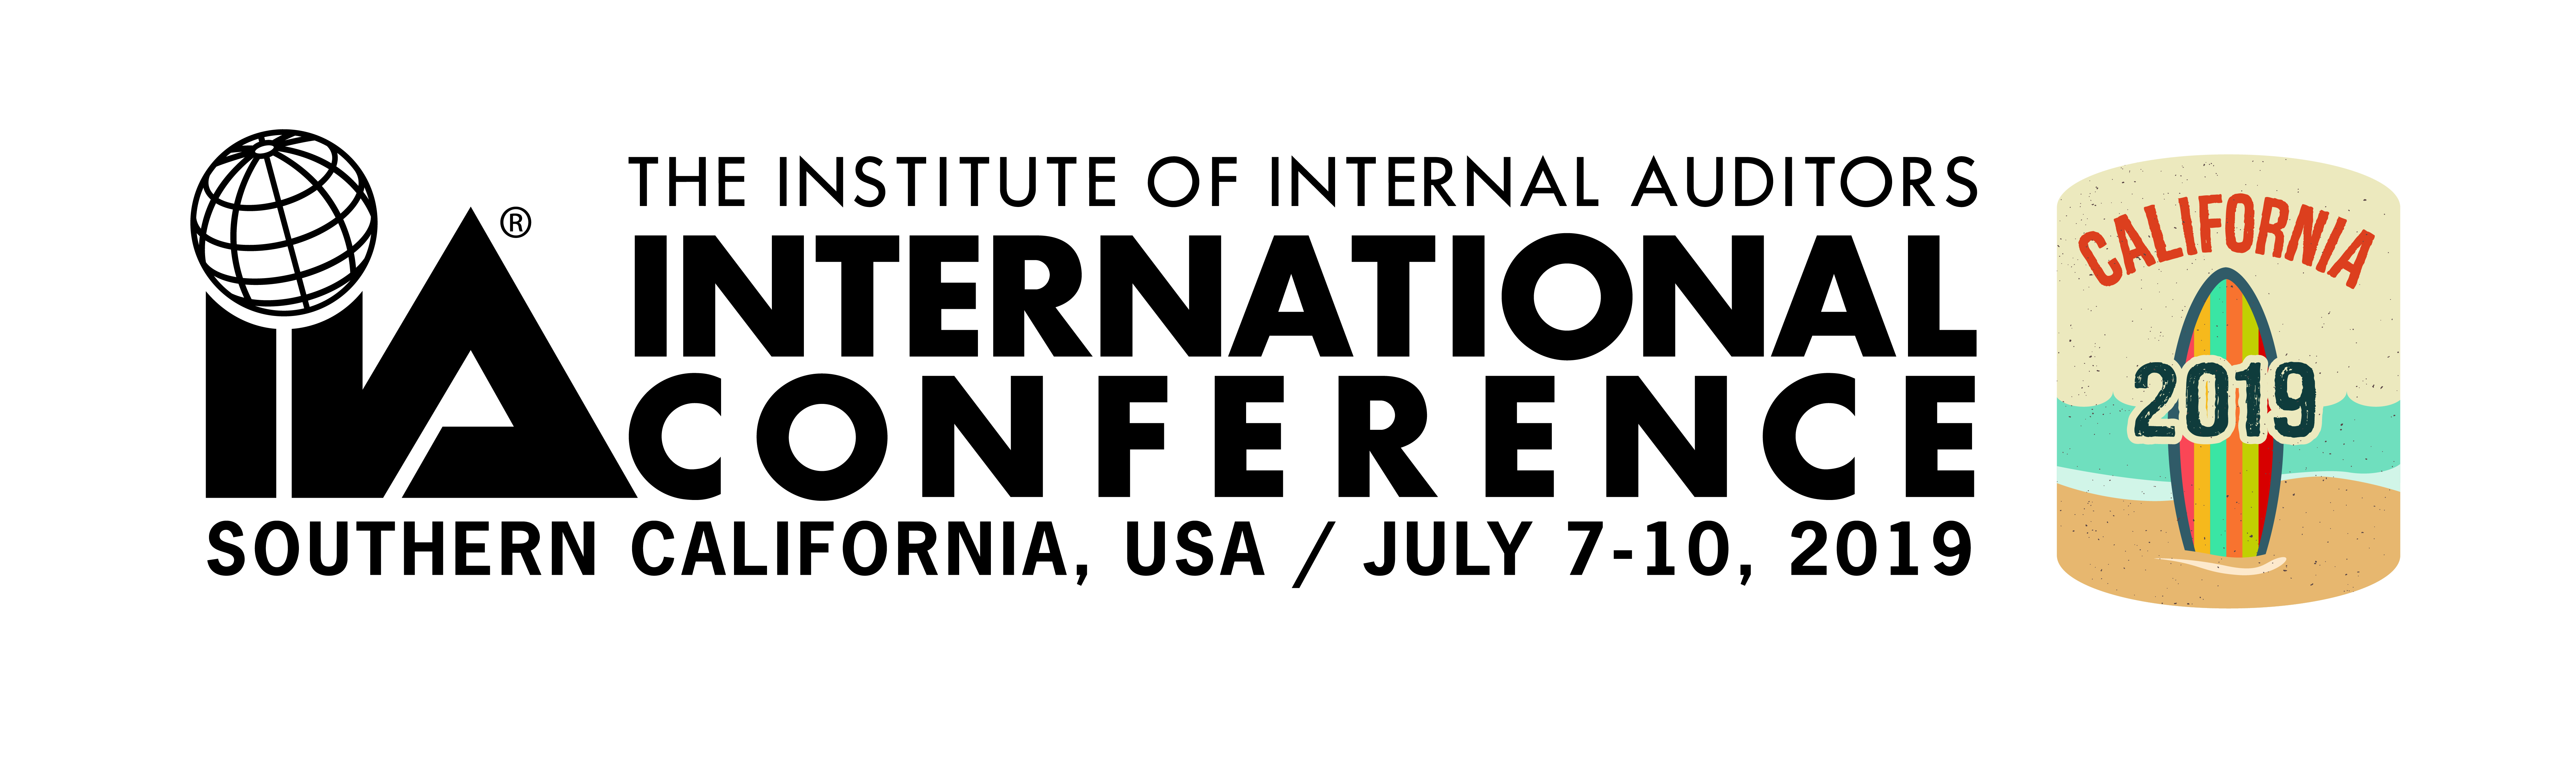 2019 International Conference Southern California